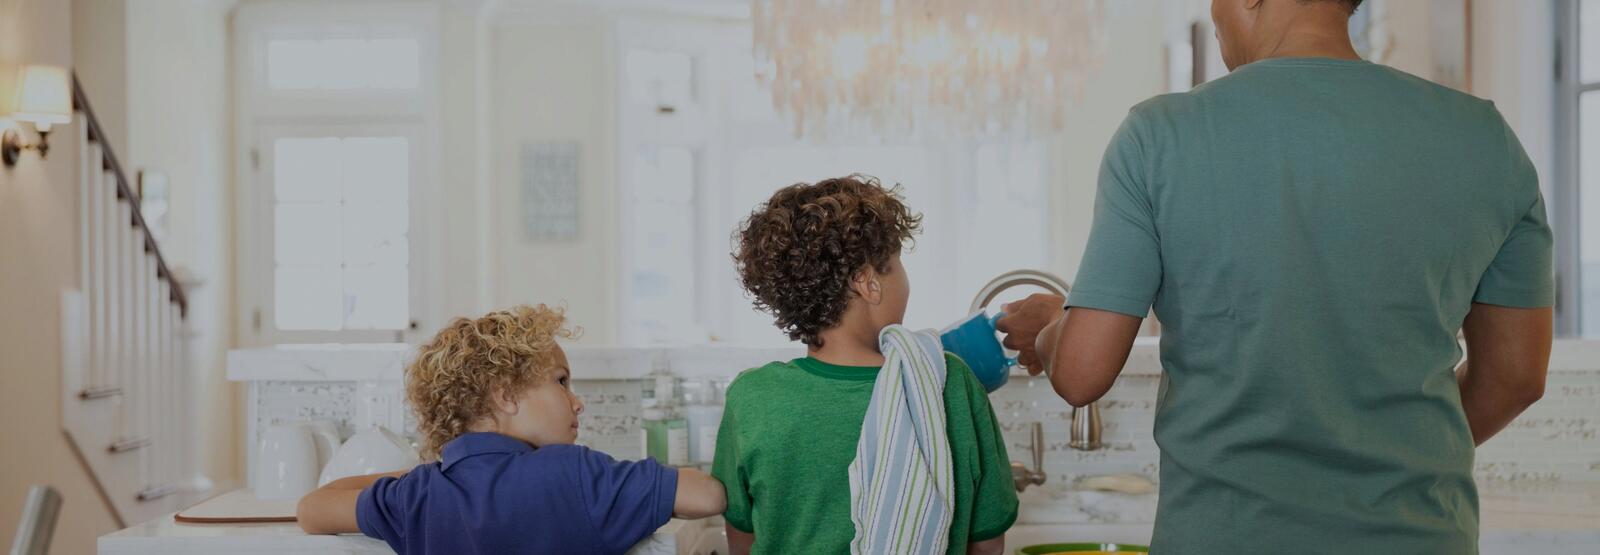 Children and father washing dishes at kitchen sink